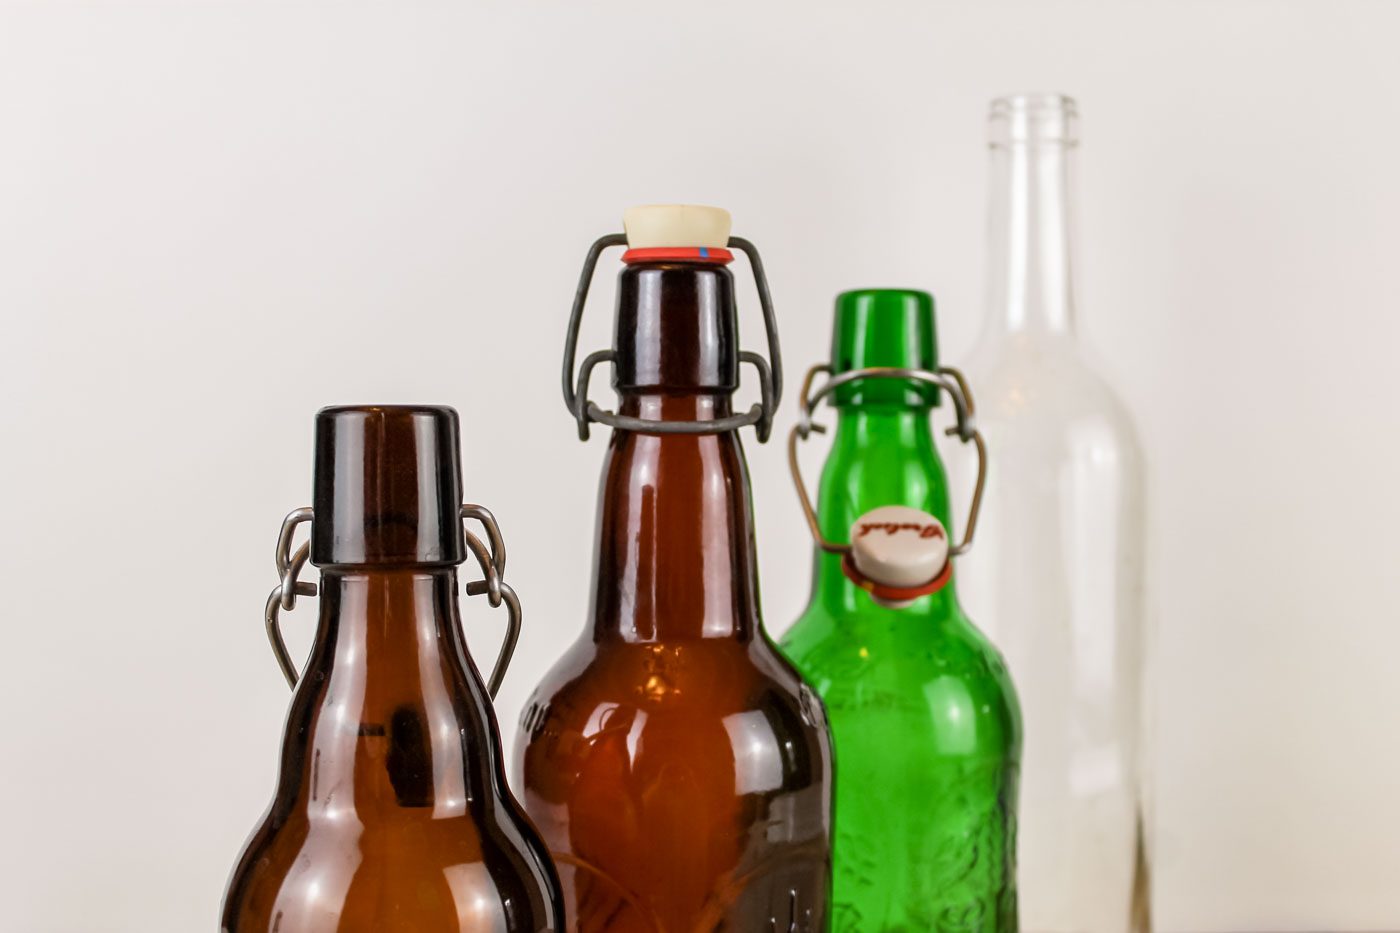 4 fermentation bottles sit in a line, two are amber colored, one is green and the last one is clear glass